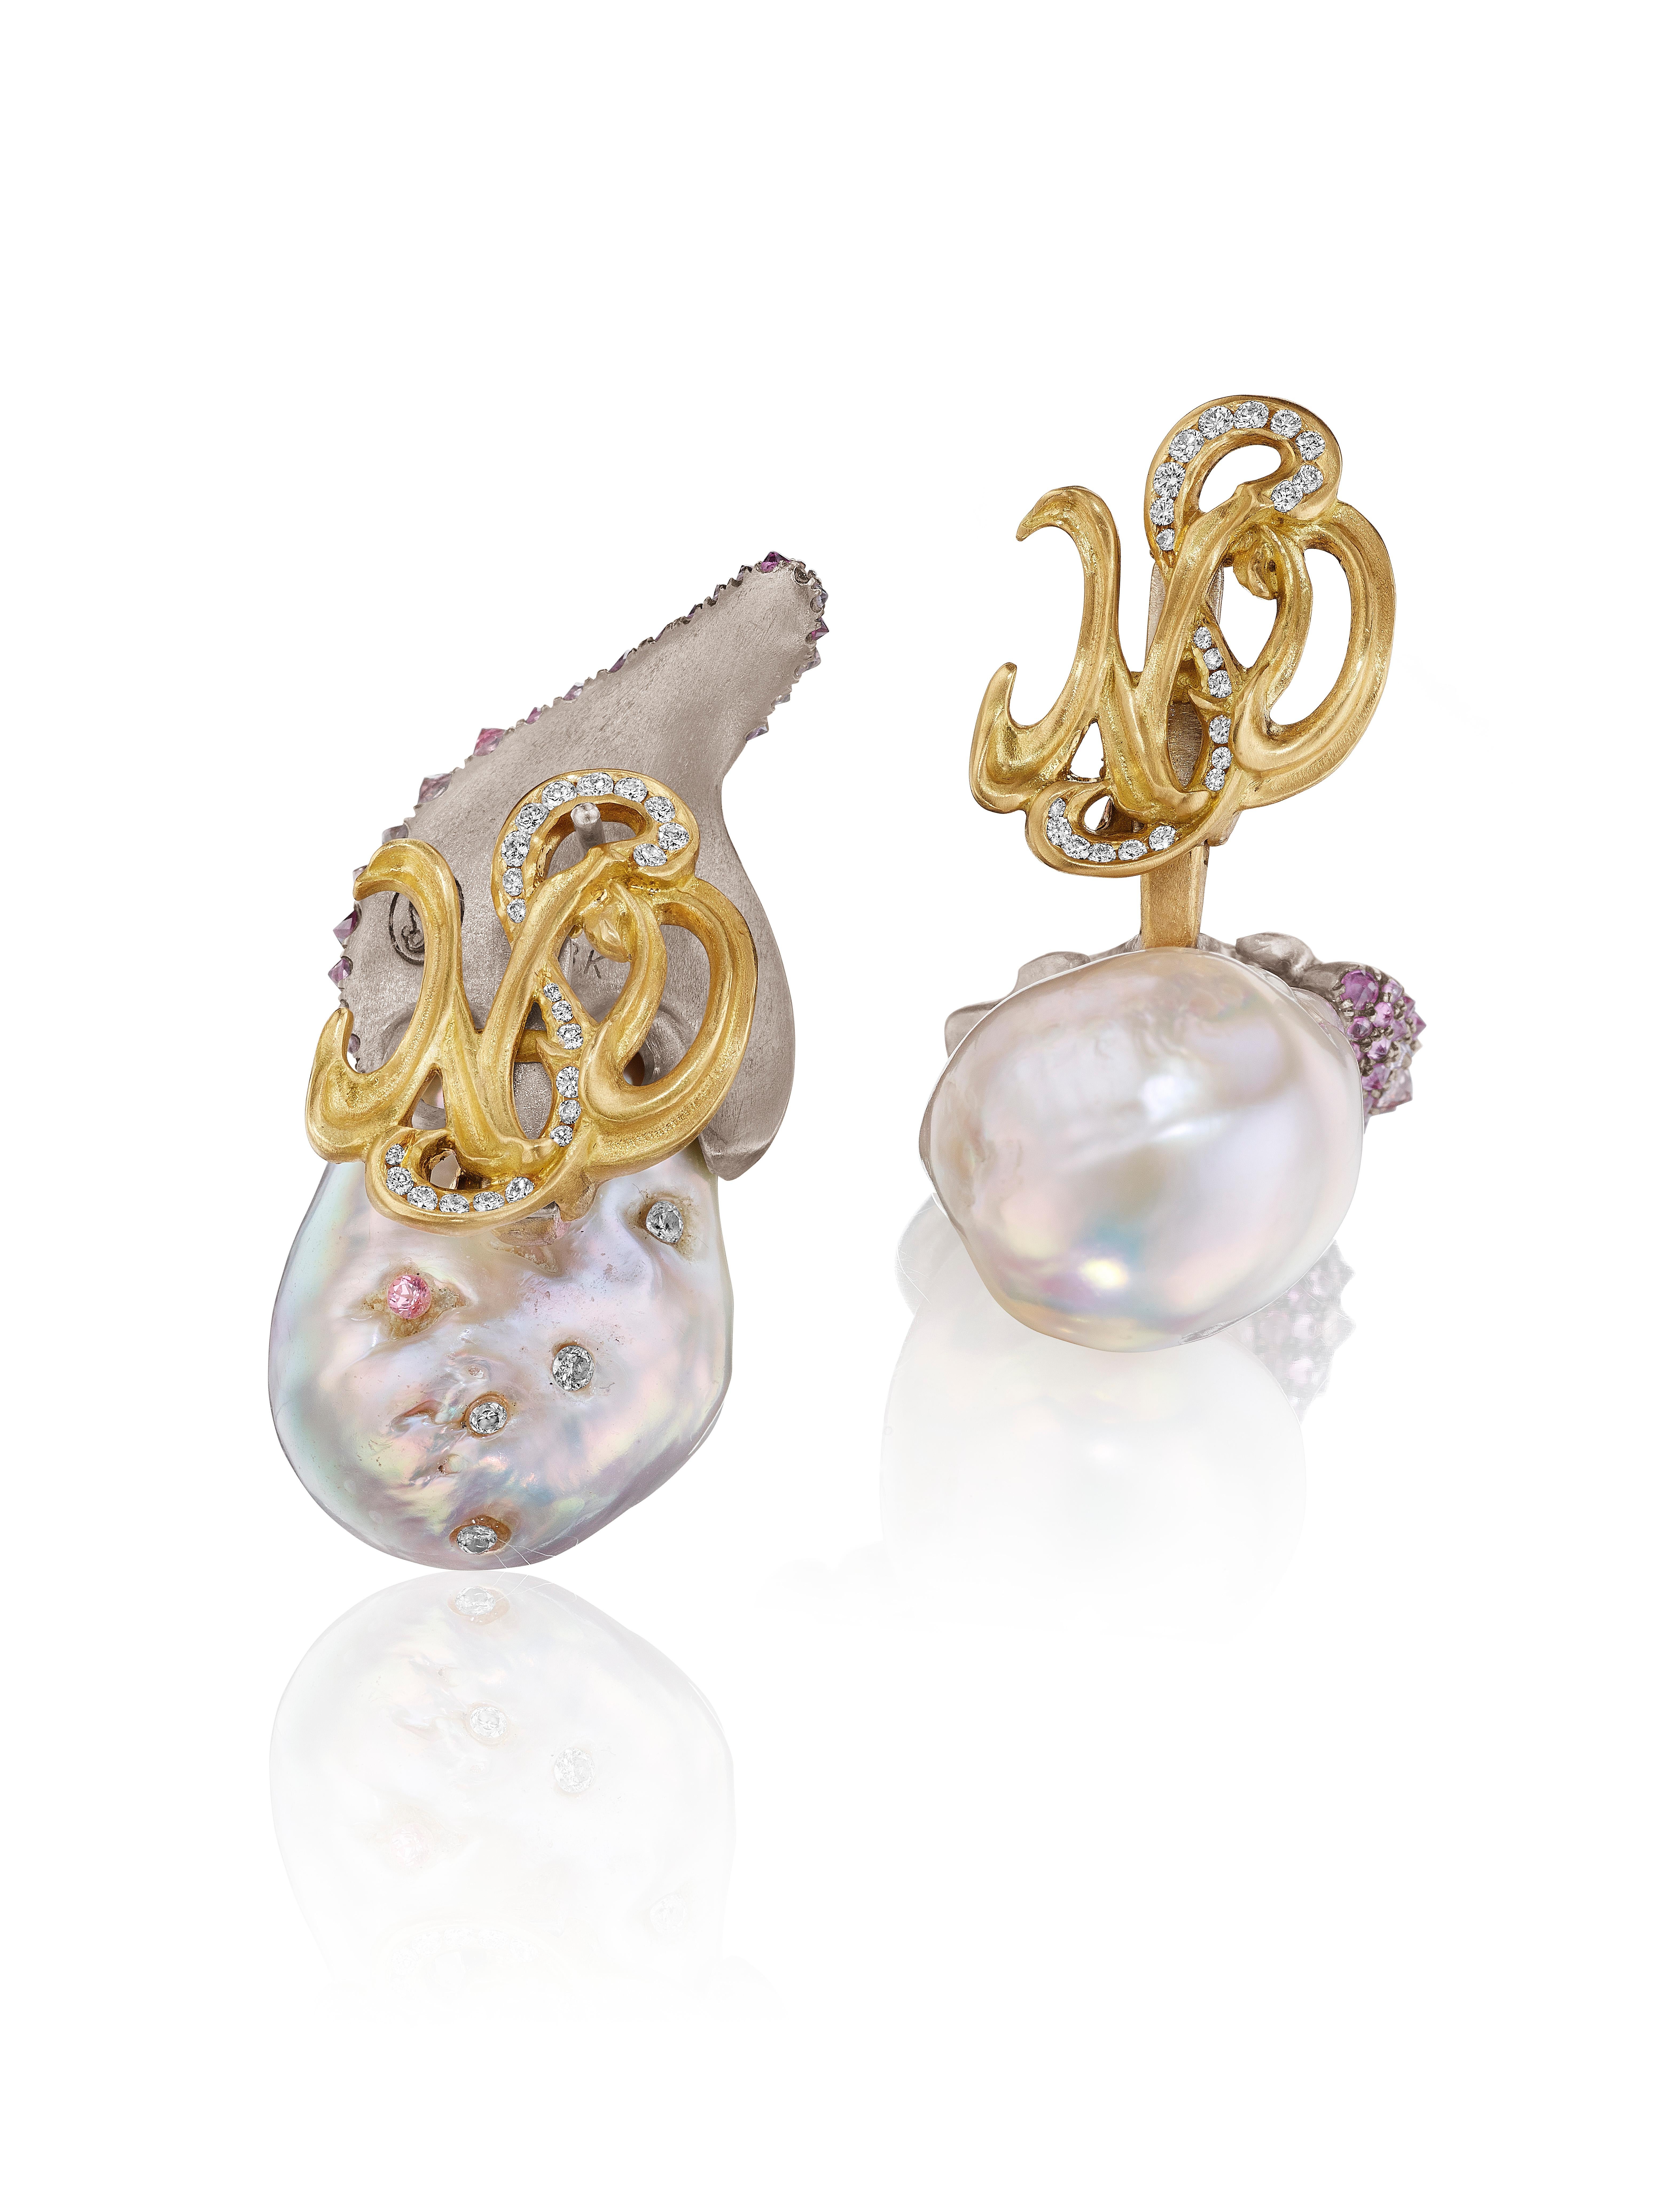 Chinese Freshwater White Pearls of unusual quality and luster are embraced with Natural 18K White Gold and set with Natural Color Pink Diamonds and Pink Sapphires. All gems are reverse set, an extremely difficult and unusual type of setting,